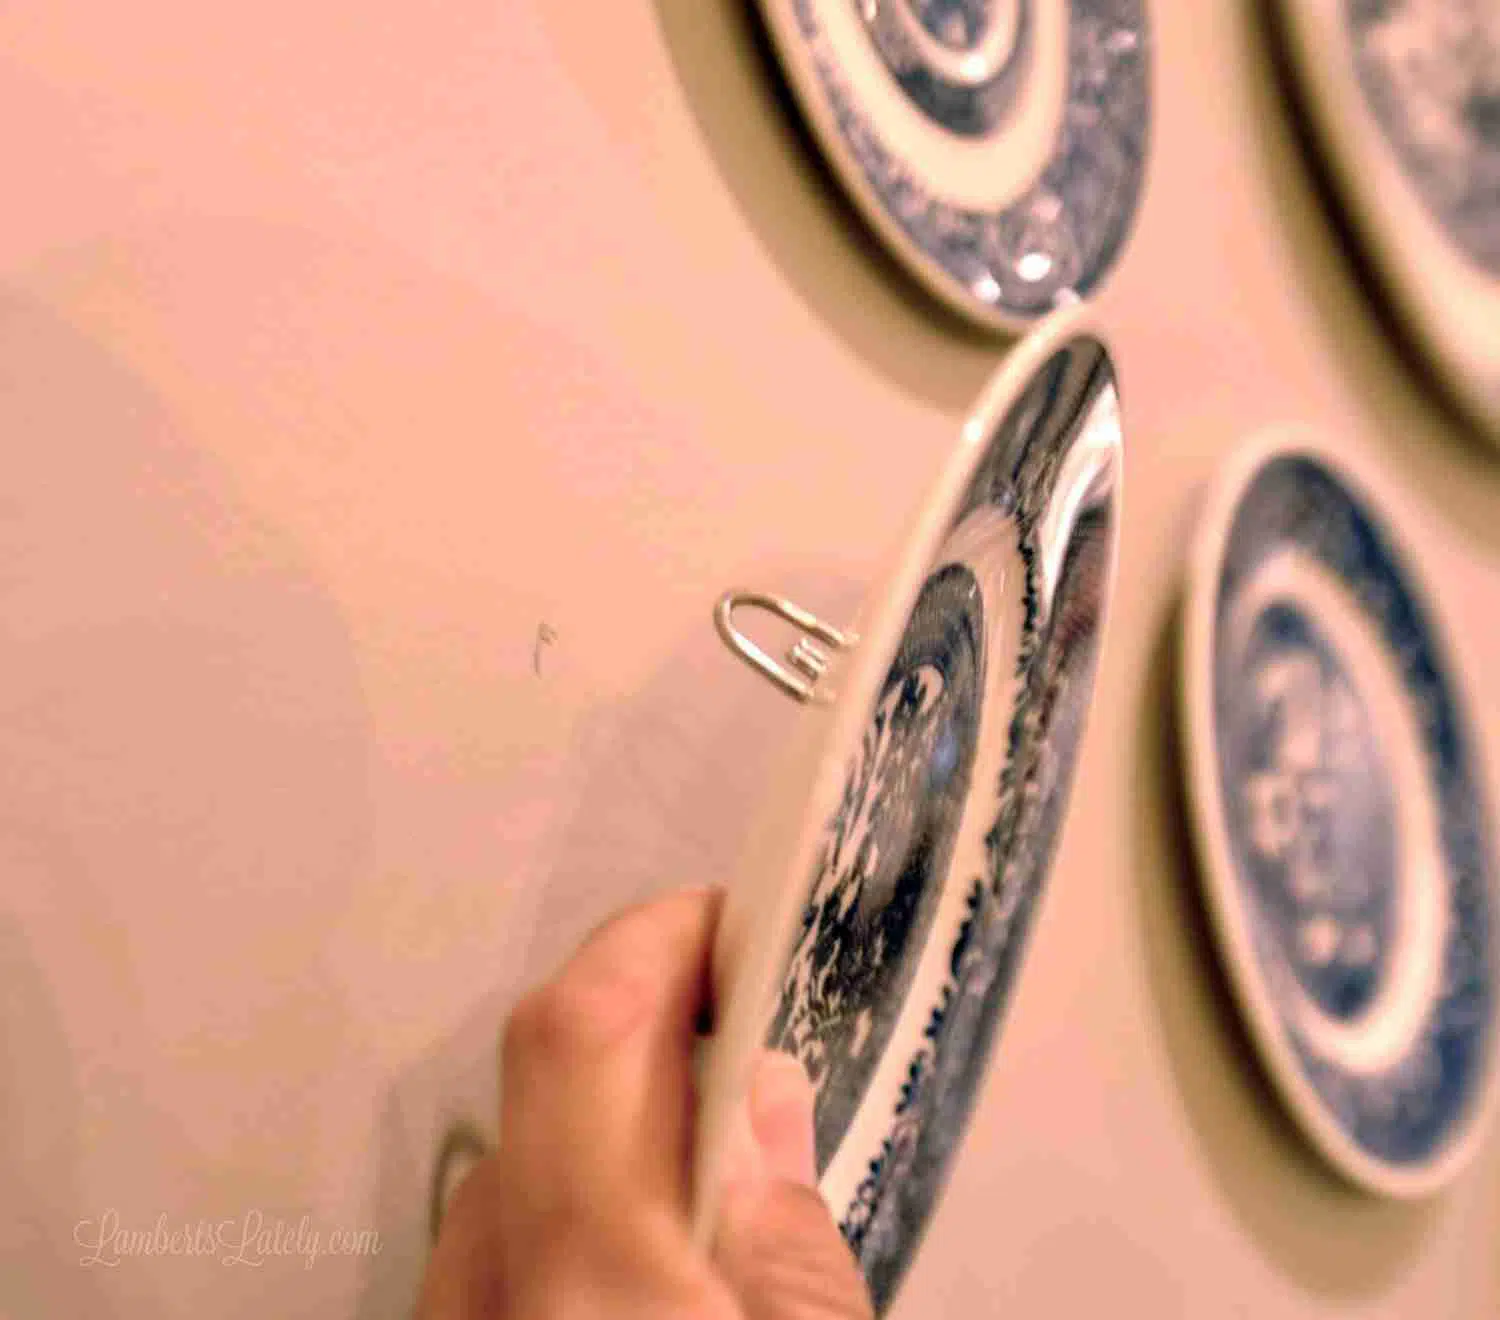 placing a plate on a nail in a wall.